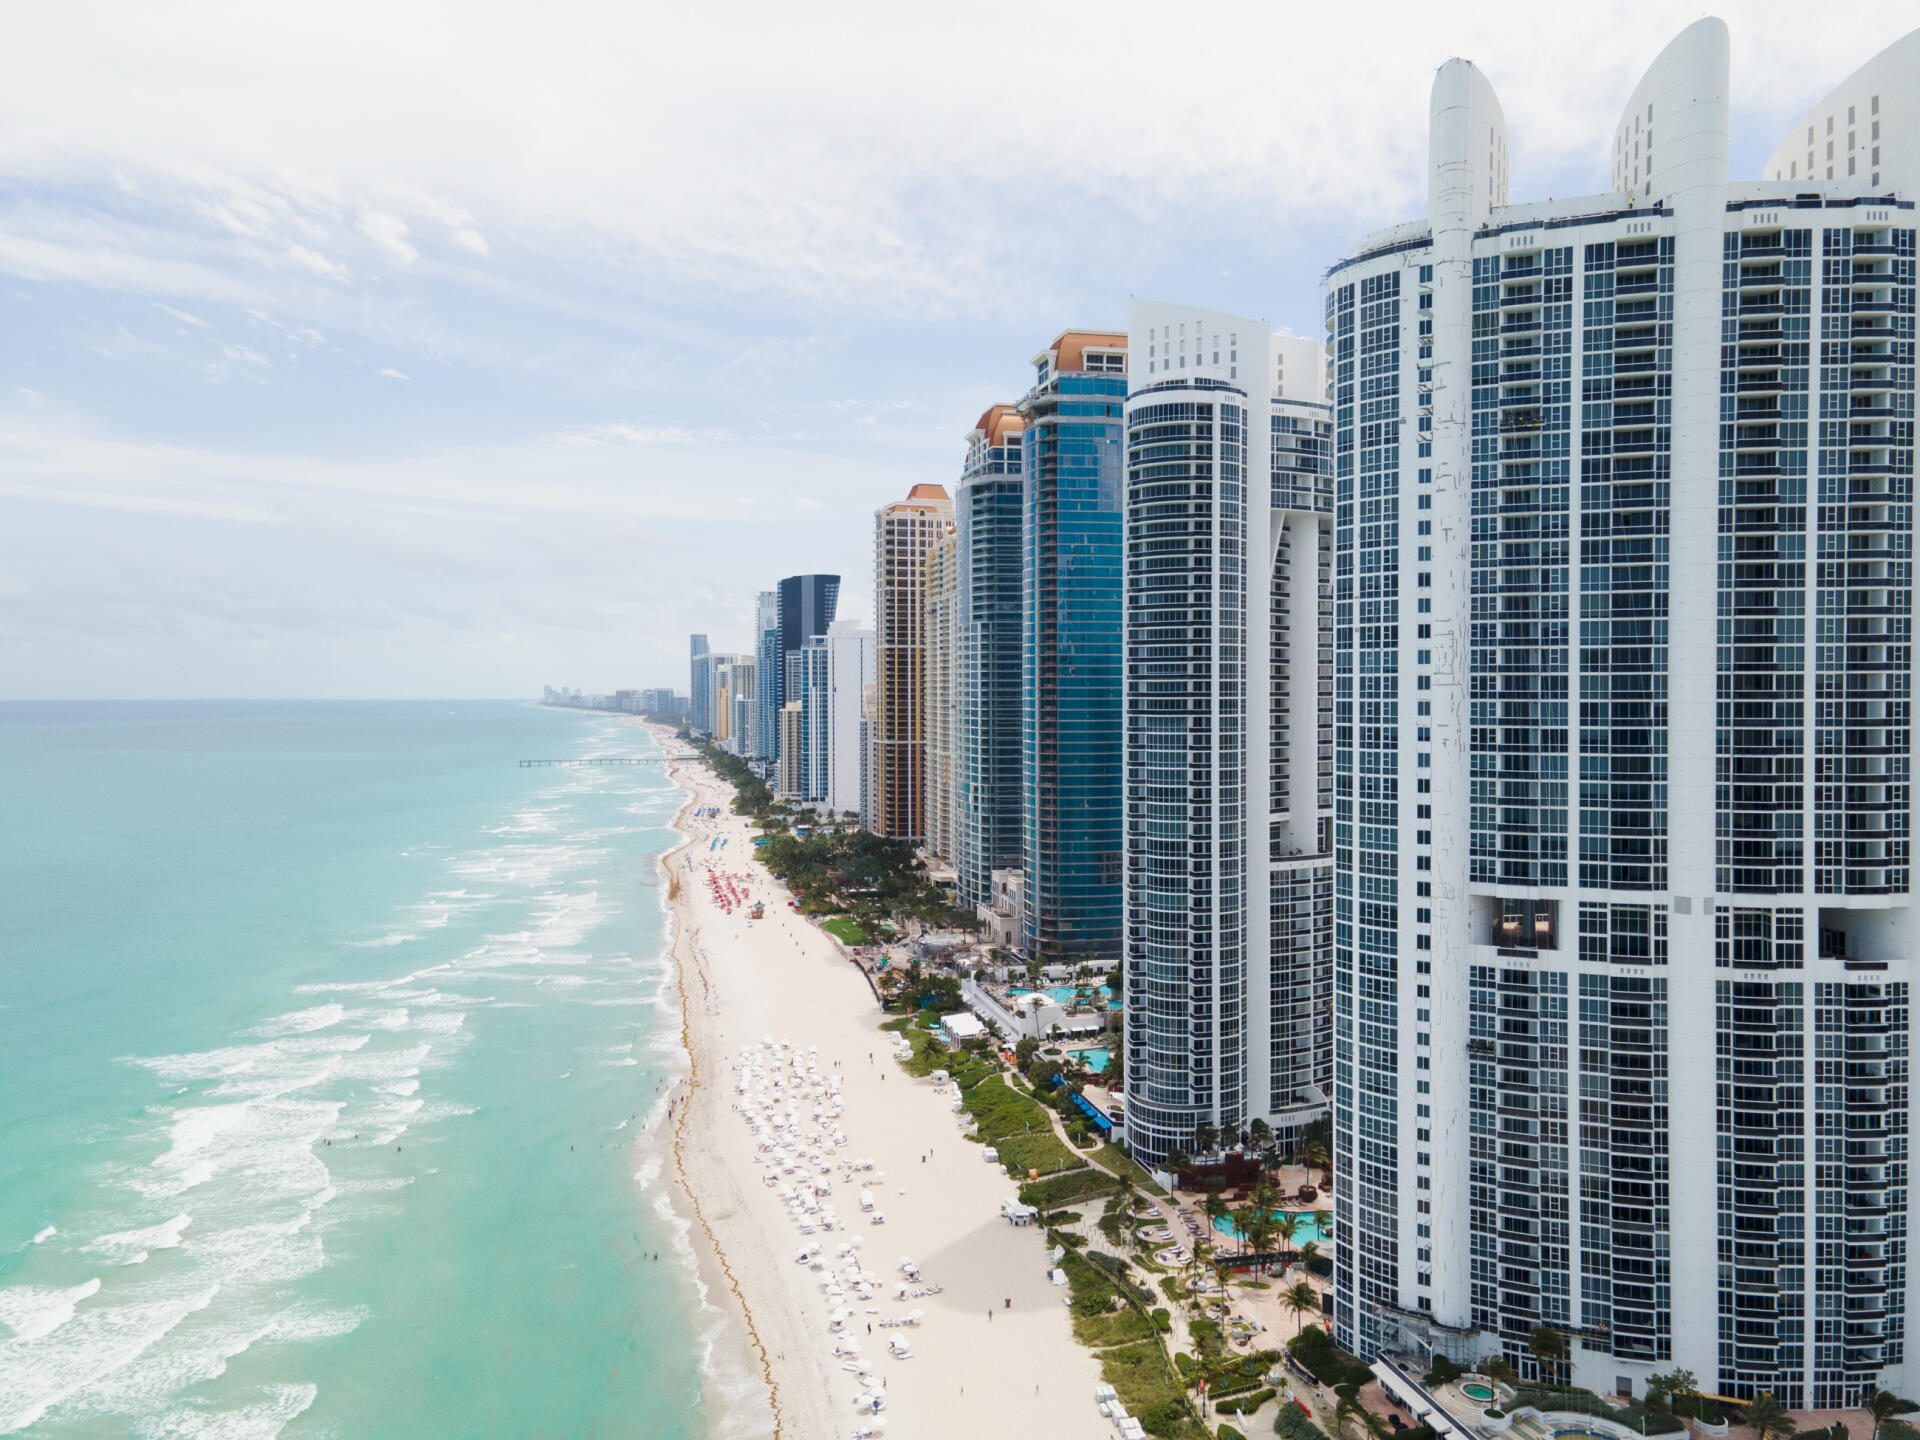 Sunny Isles Beach (Florida), in April 2022. The Garcia mining company supplied the sand necessary for its filling.